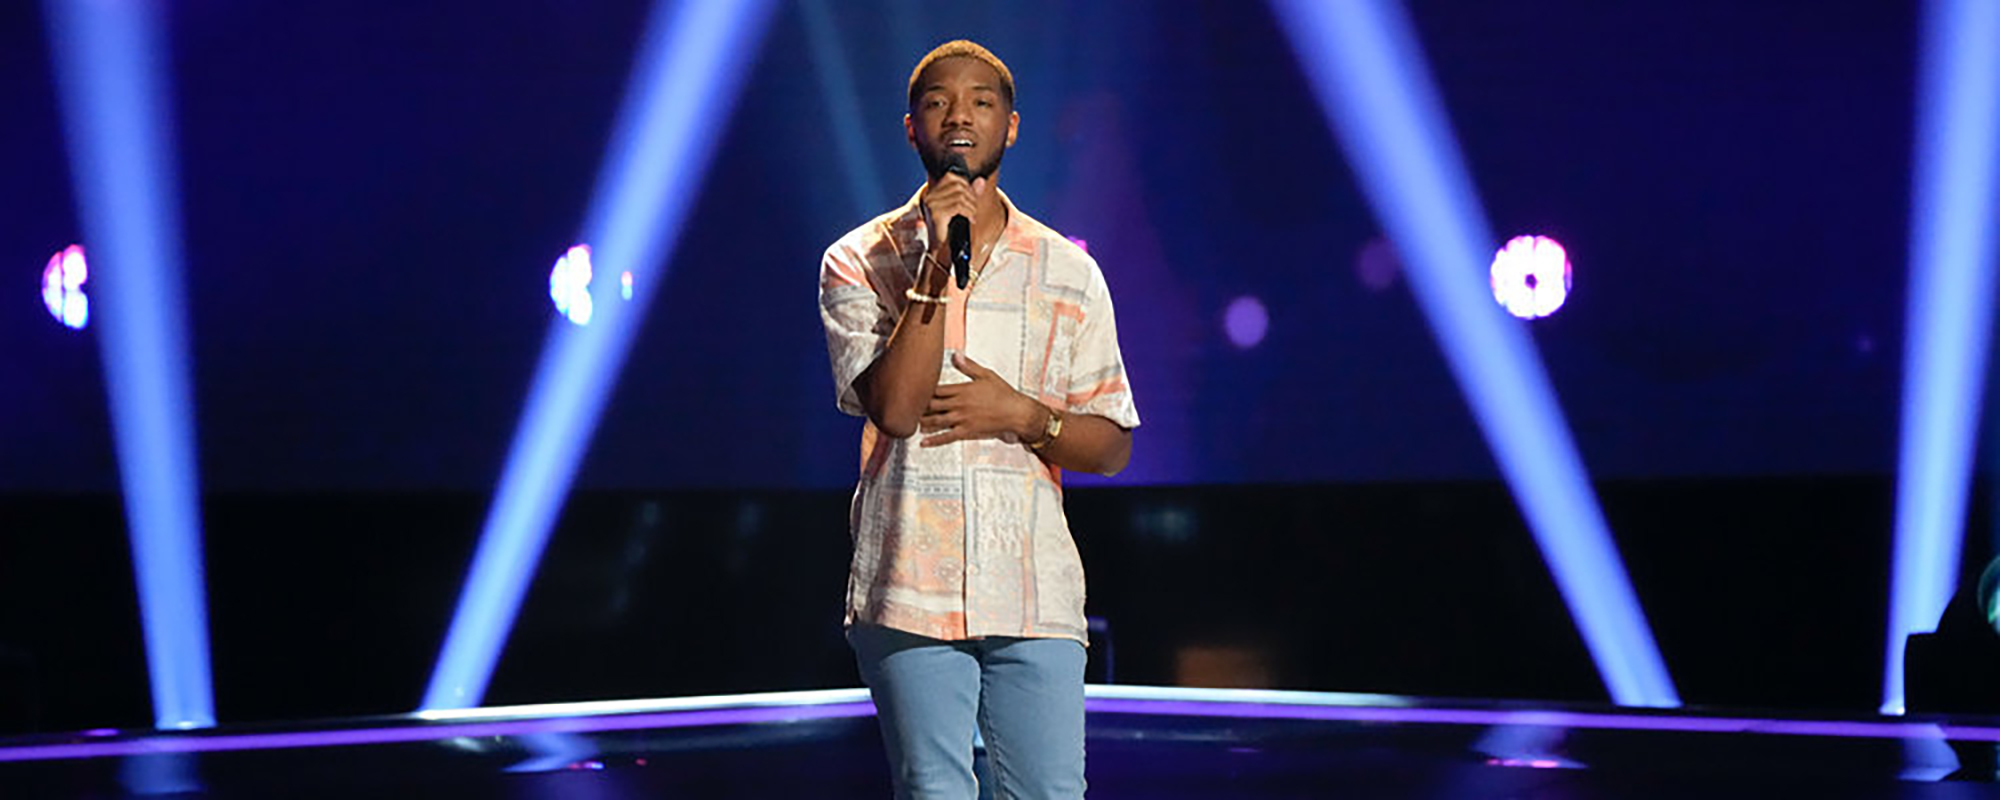 Ray Uriel’s Smooth Voice Shines on ‘The Voice’ Audition